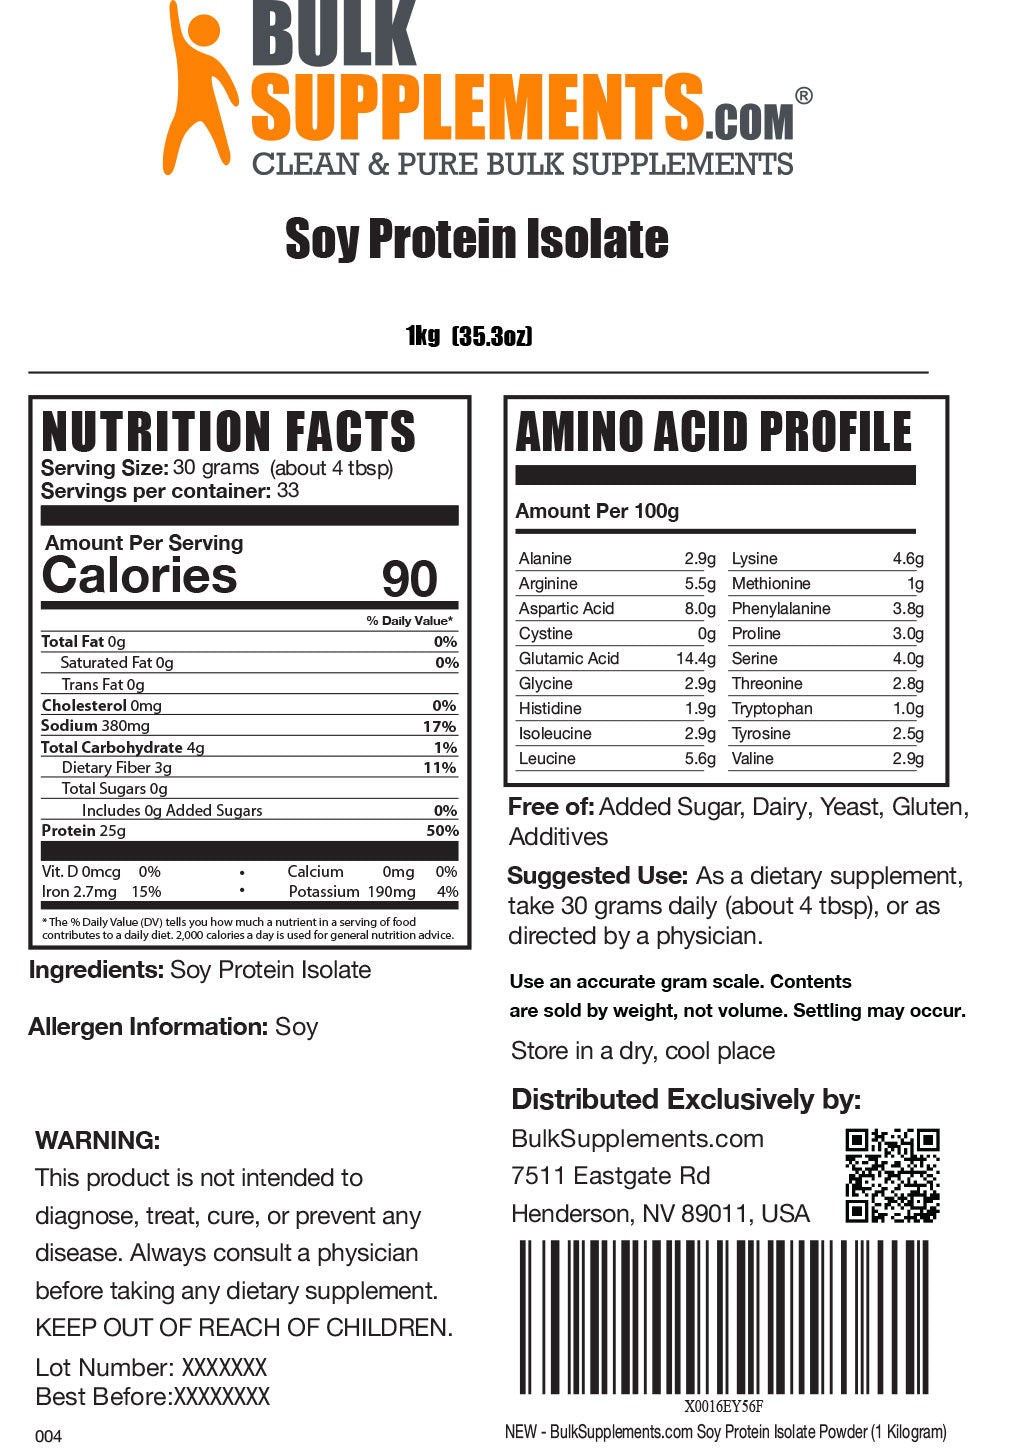 Soy Protein Isolate Label 1kg